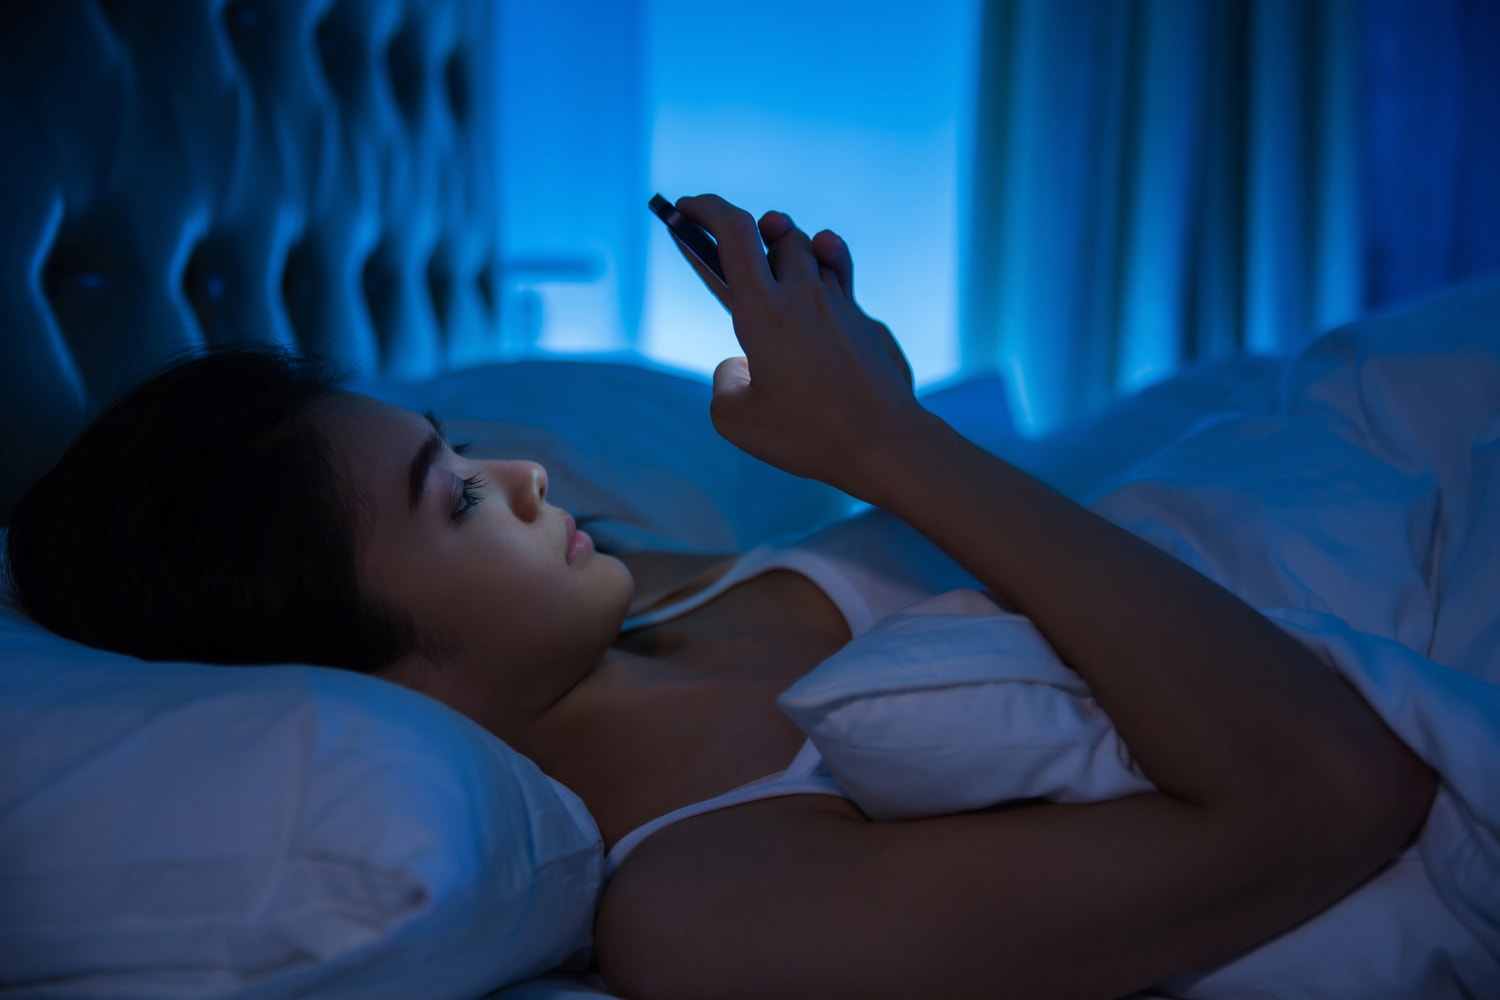 The Night Shift mode on Apple products may not be worth the hype. Using dim, cooler lights in the evening may be more beneficial to our sleep and health.